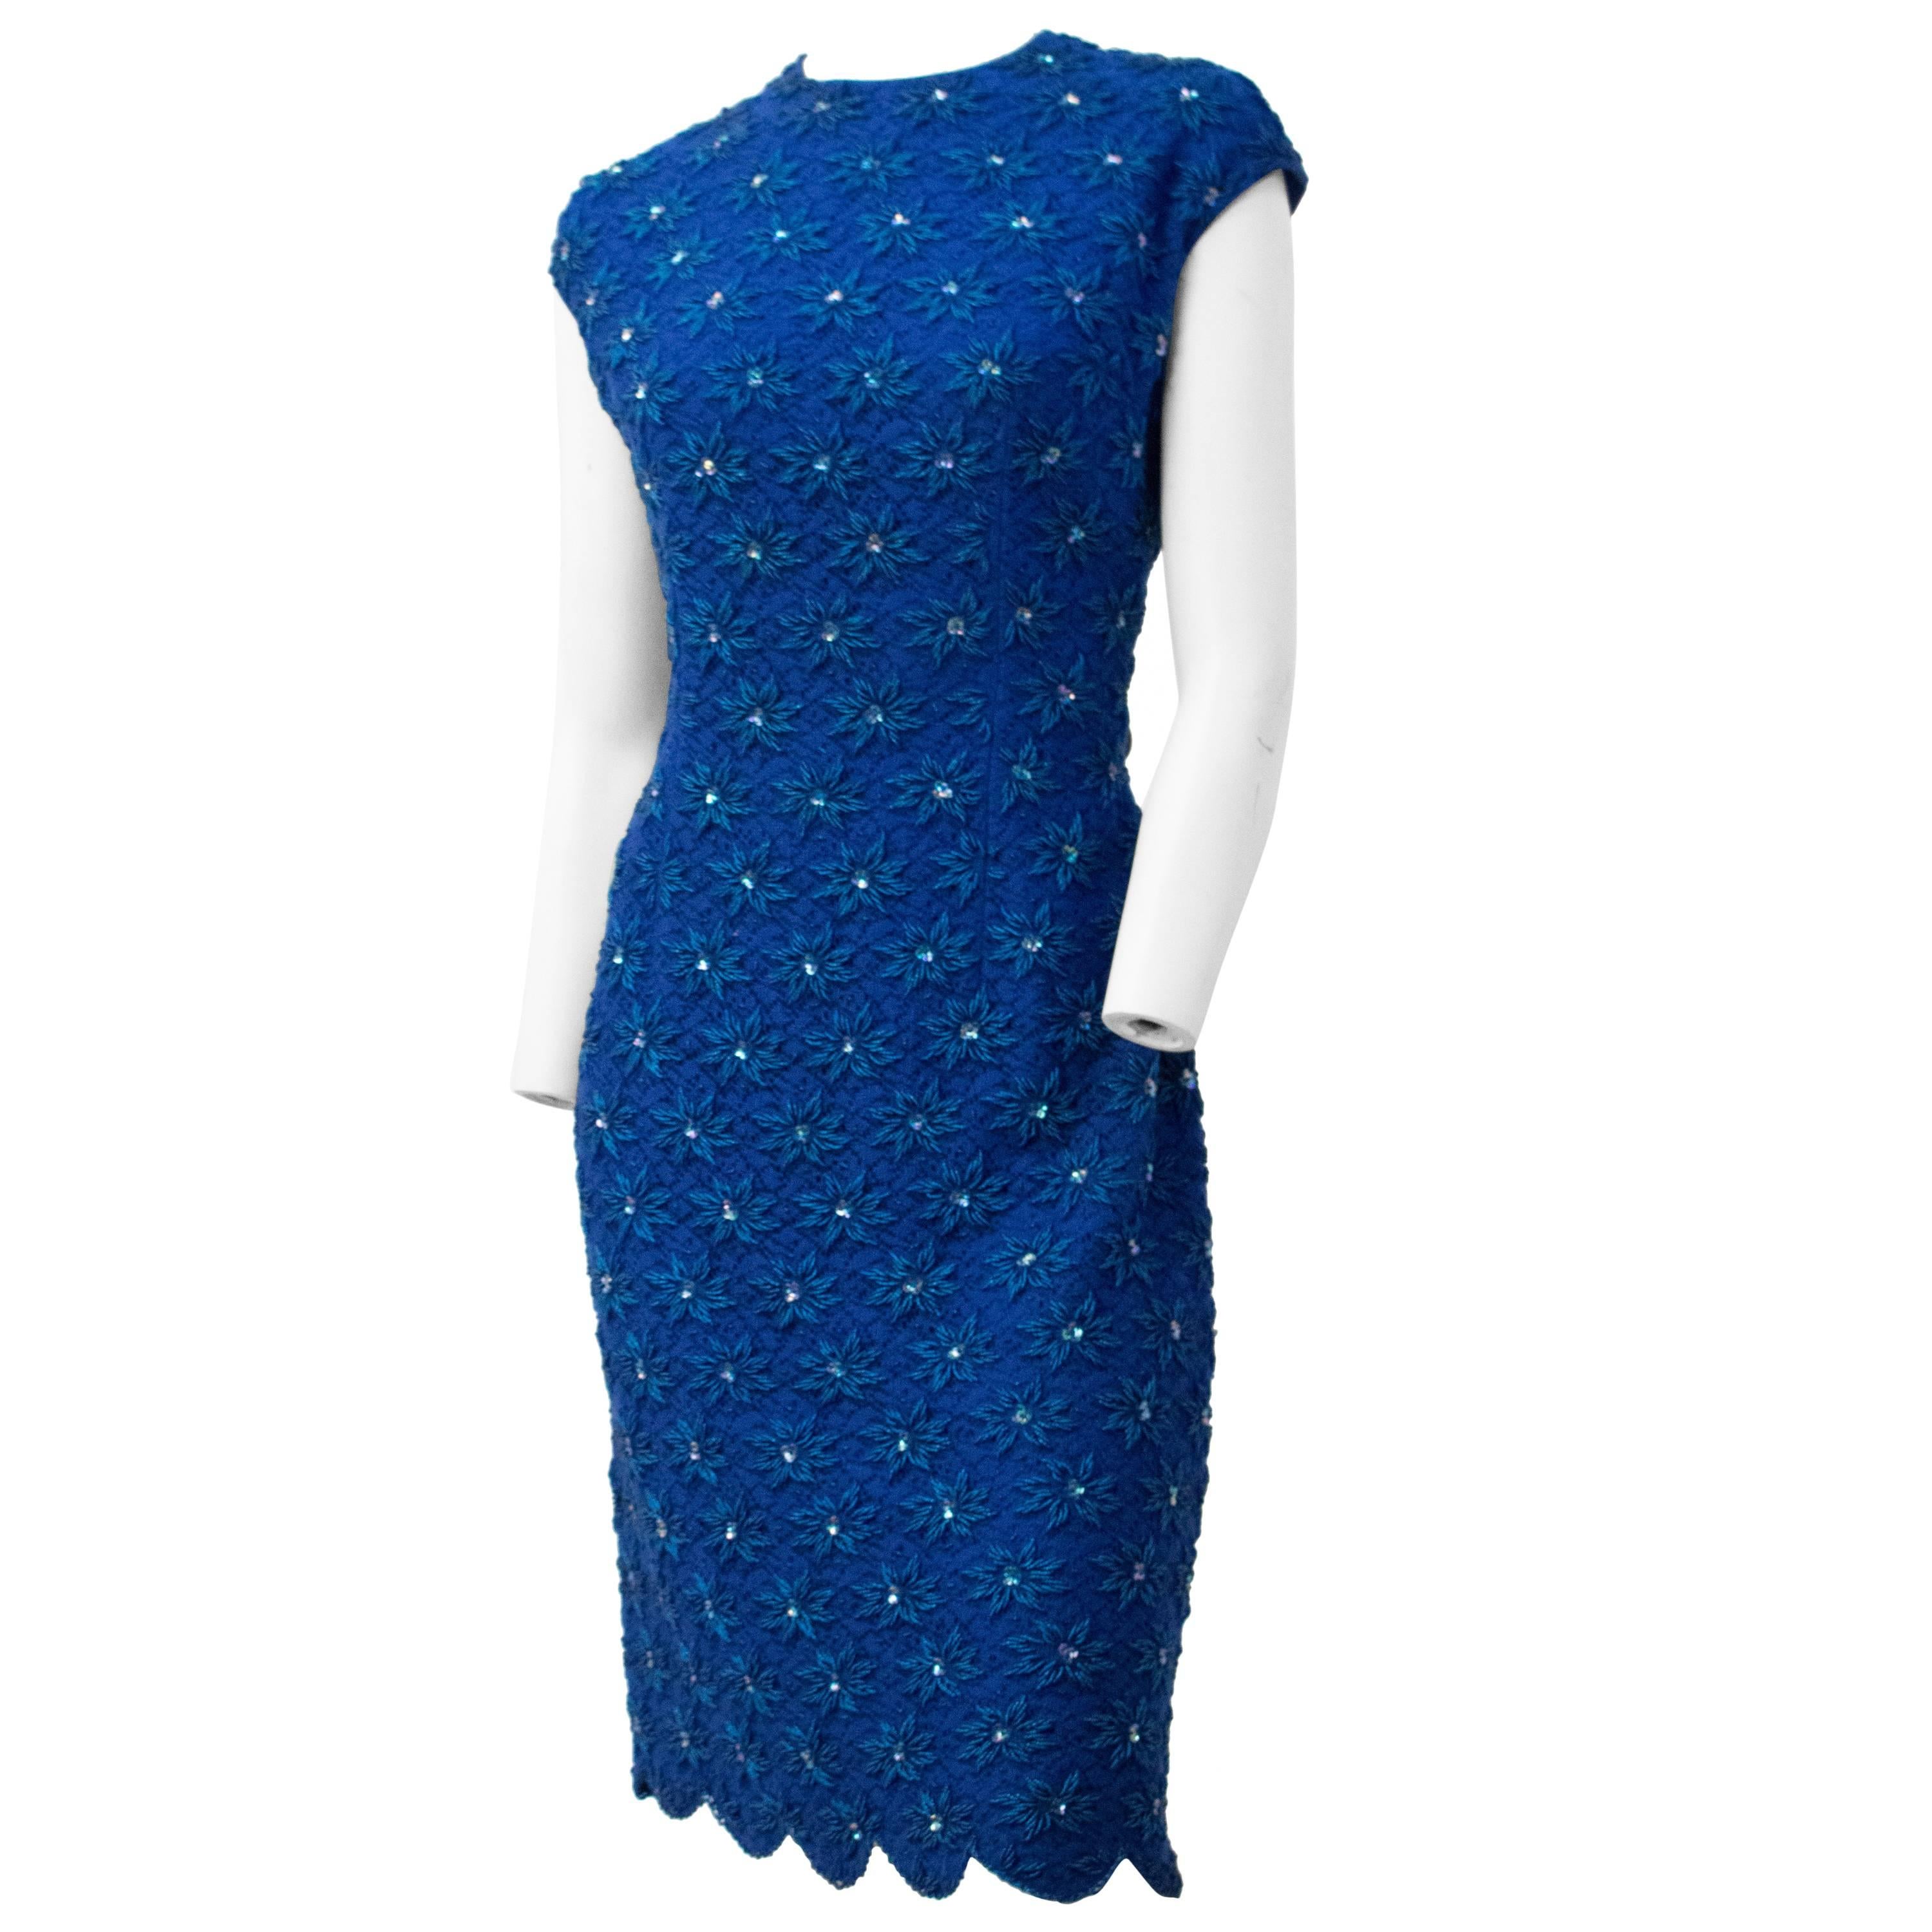 1960s Royal Blue Lace and Beaded Sheath Dress with Scallop Hem 